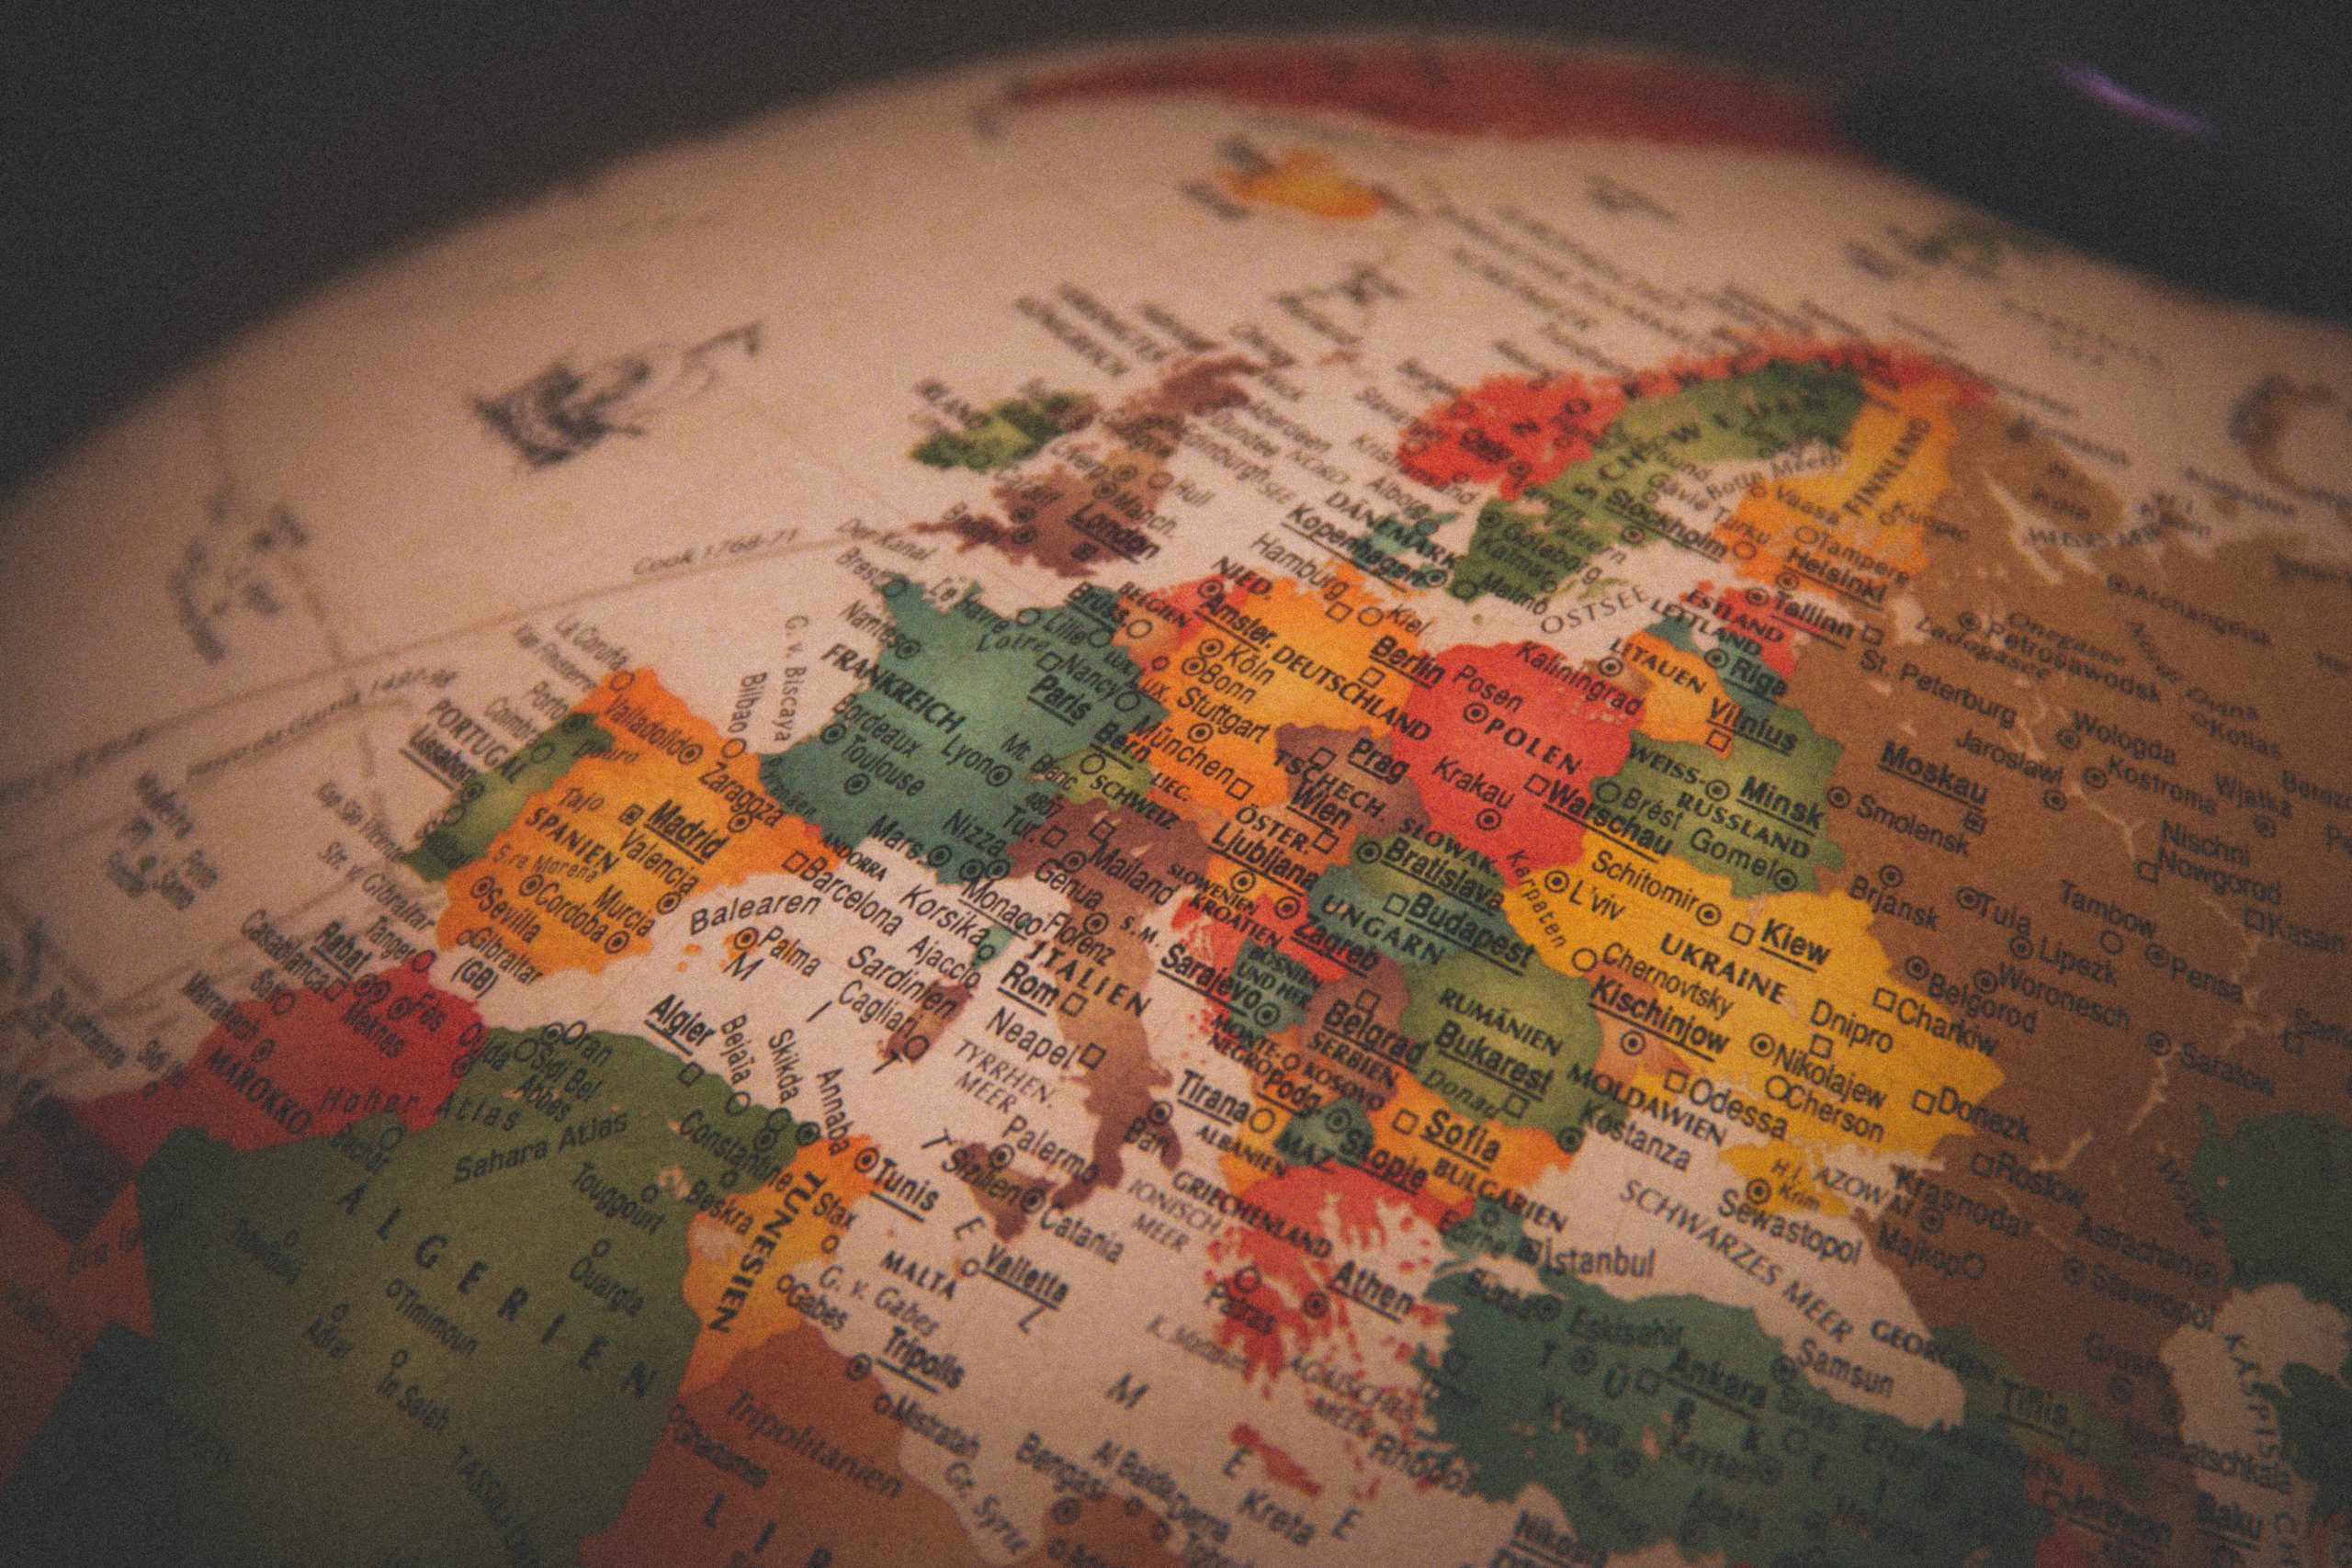 in an article about casino regulations in Europe, a photo of Europe on a globe